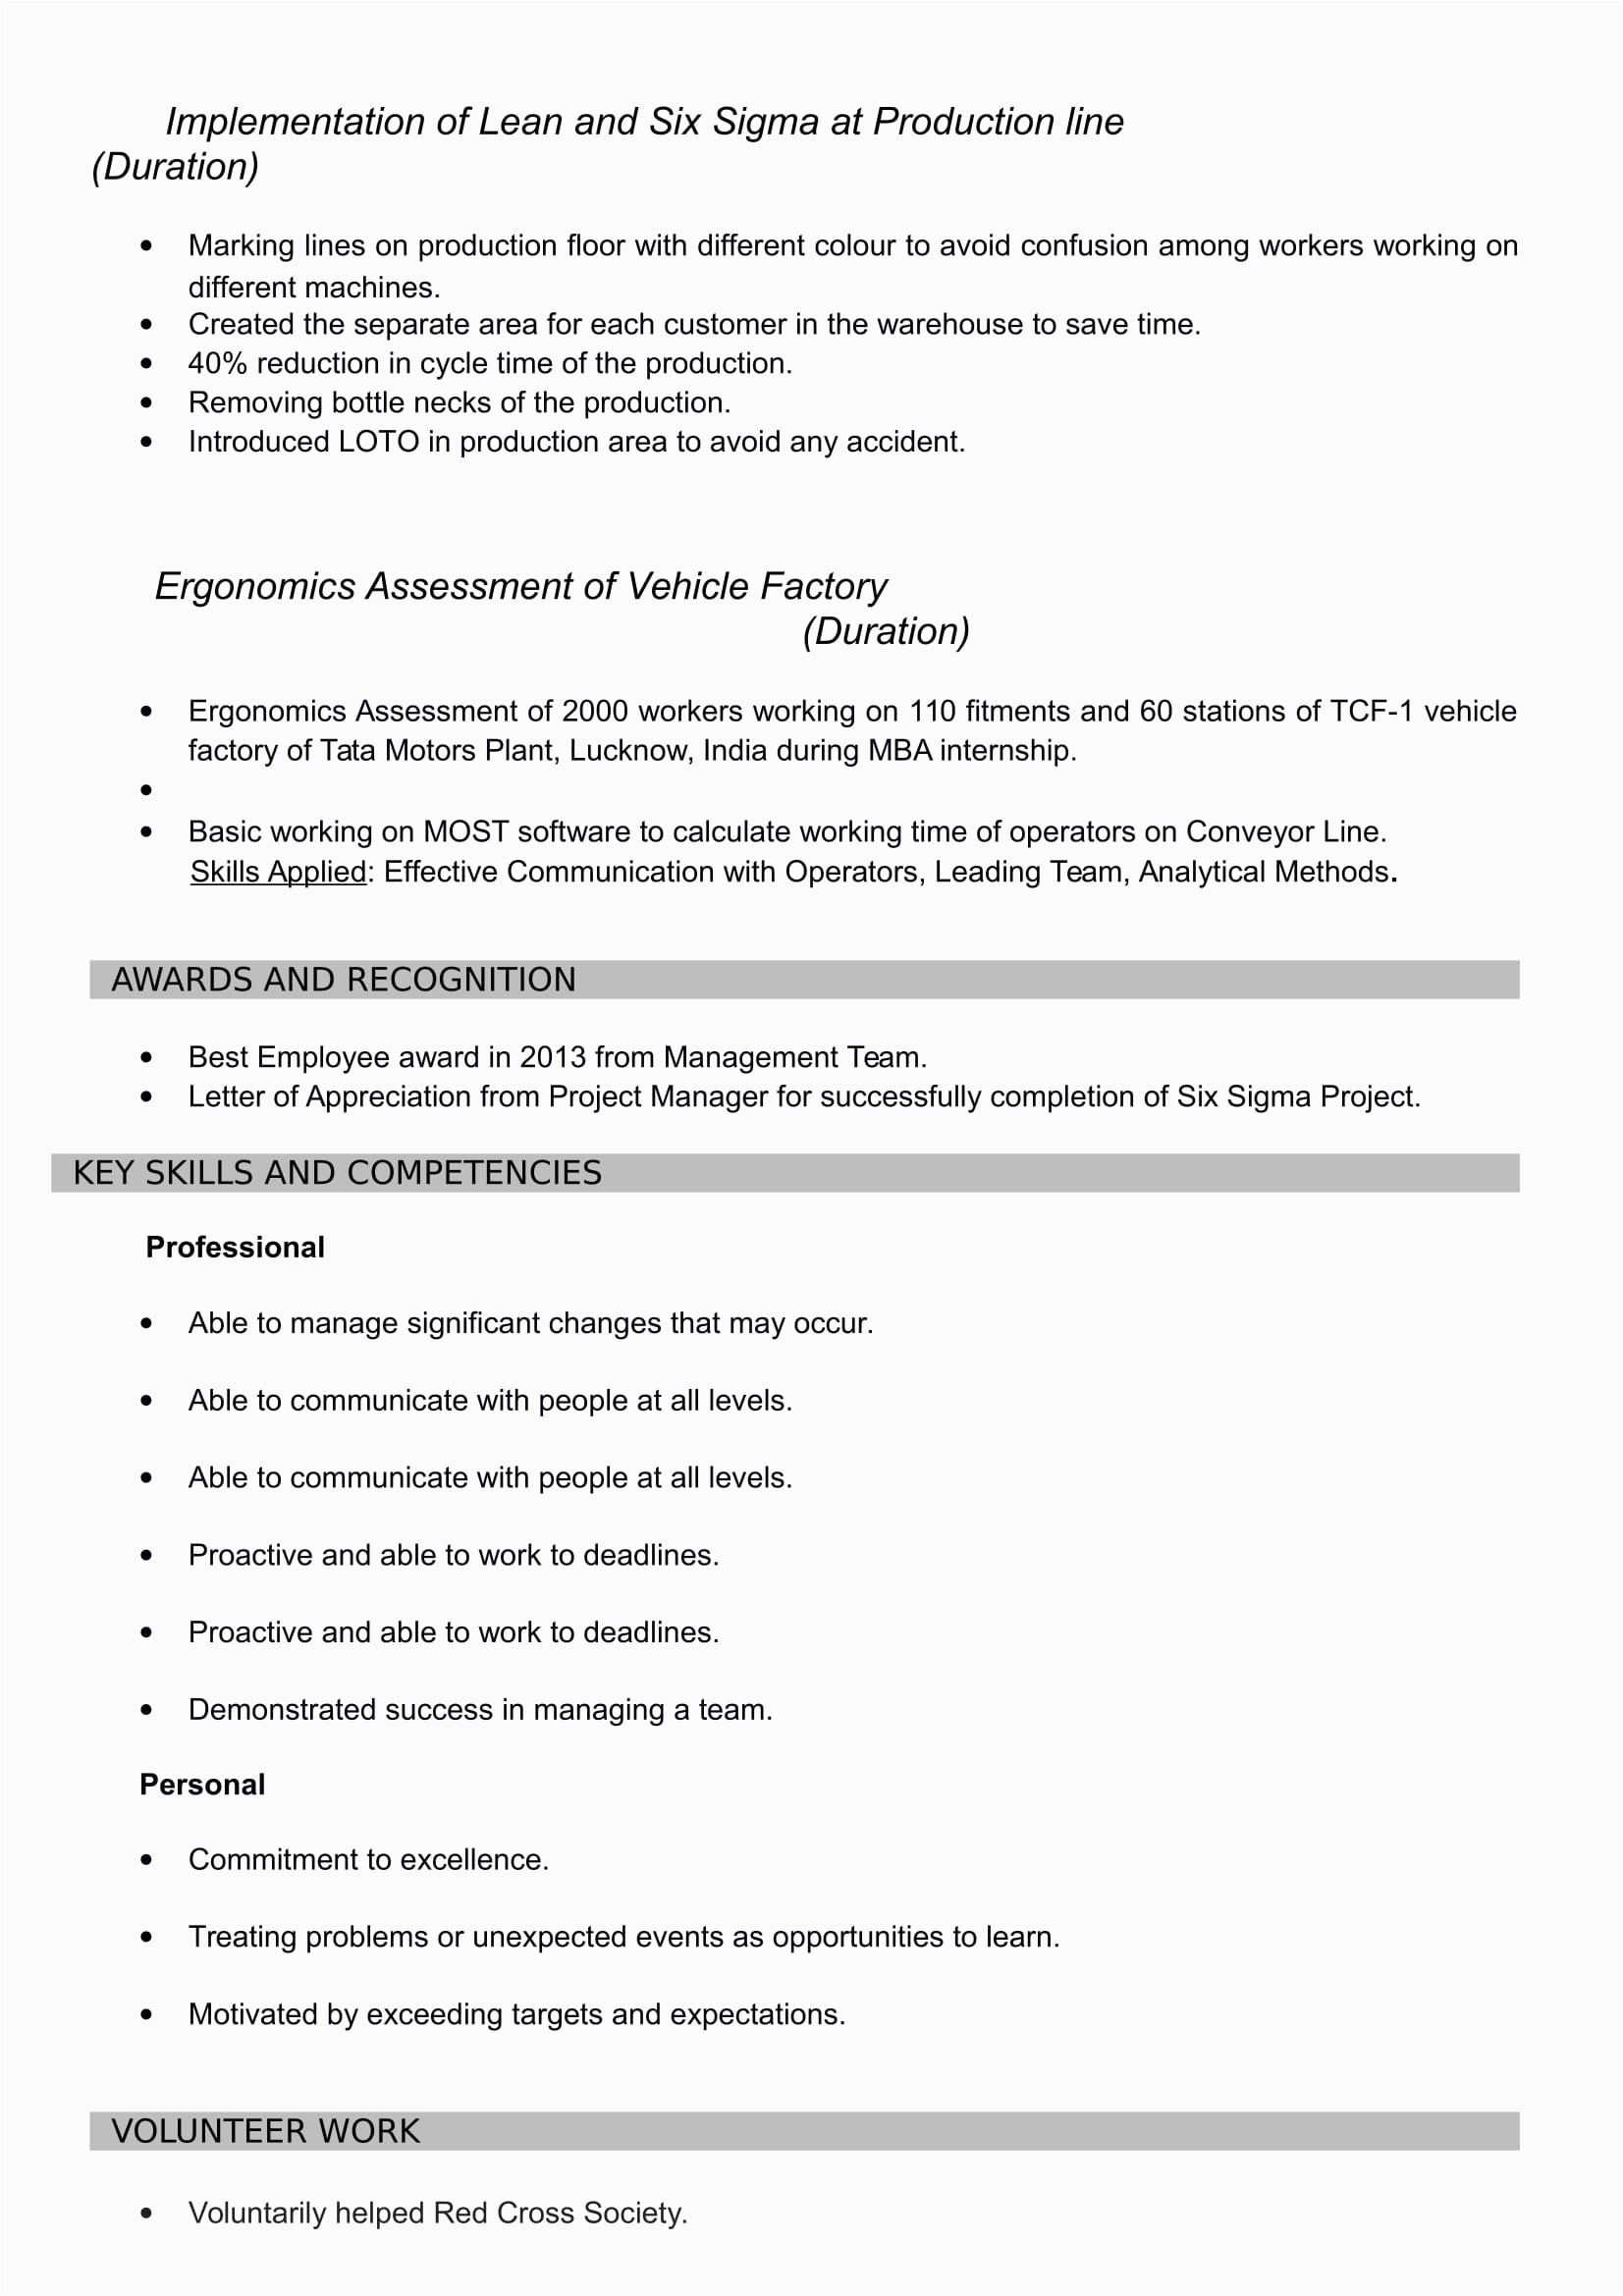 Free Resume Samples for Mba Freshers Resume Templates for Mba Freshers Download Free